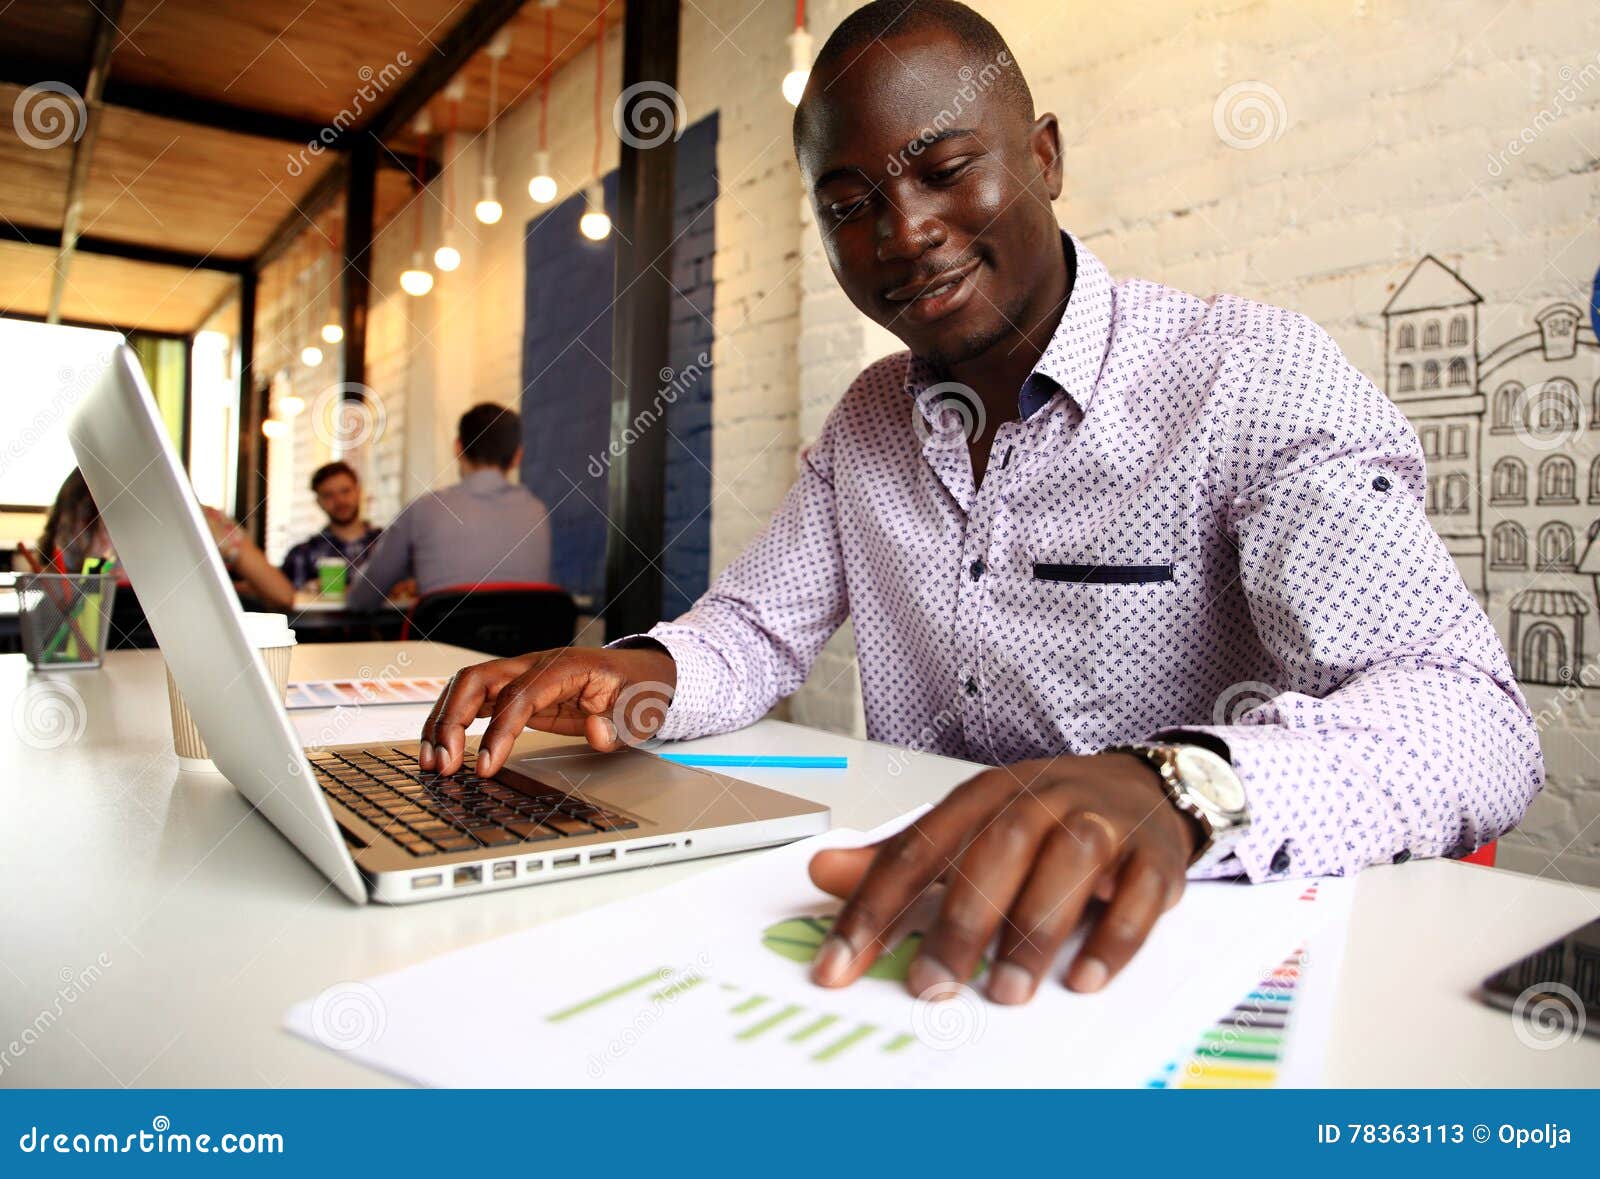 image of african american businessman working on his laptop. handsome young man at his desk